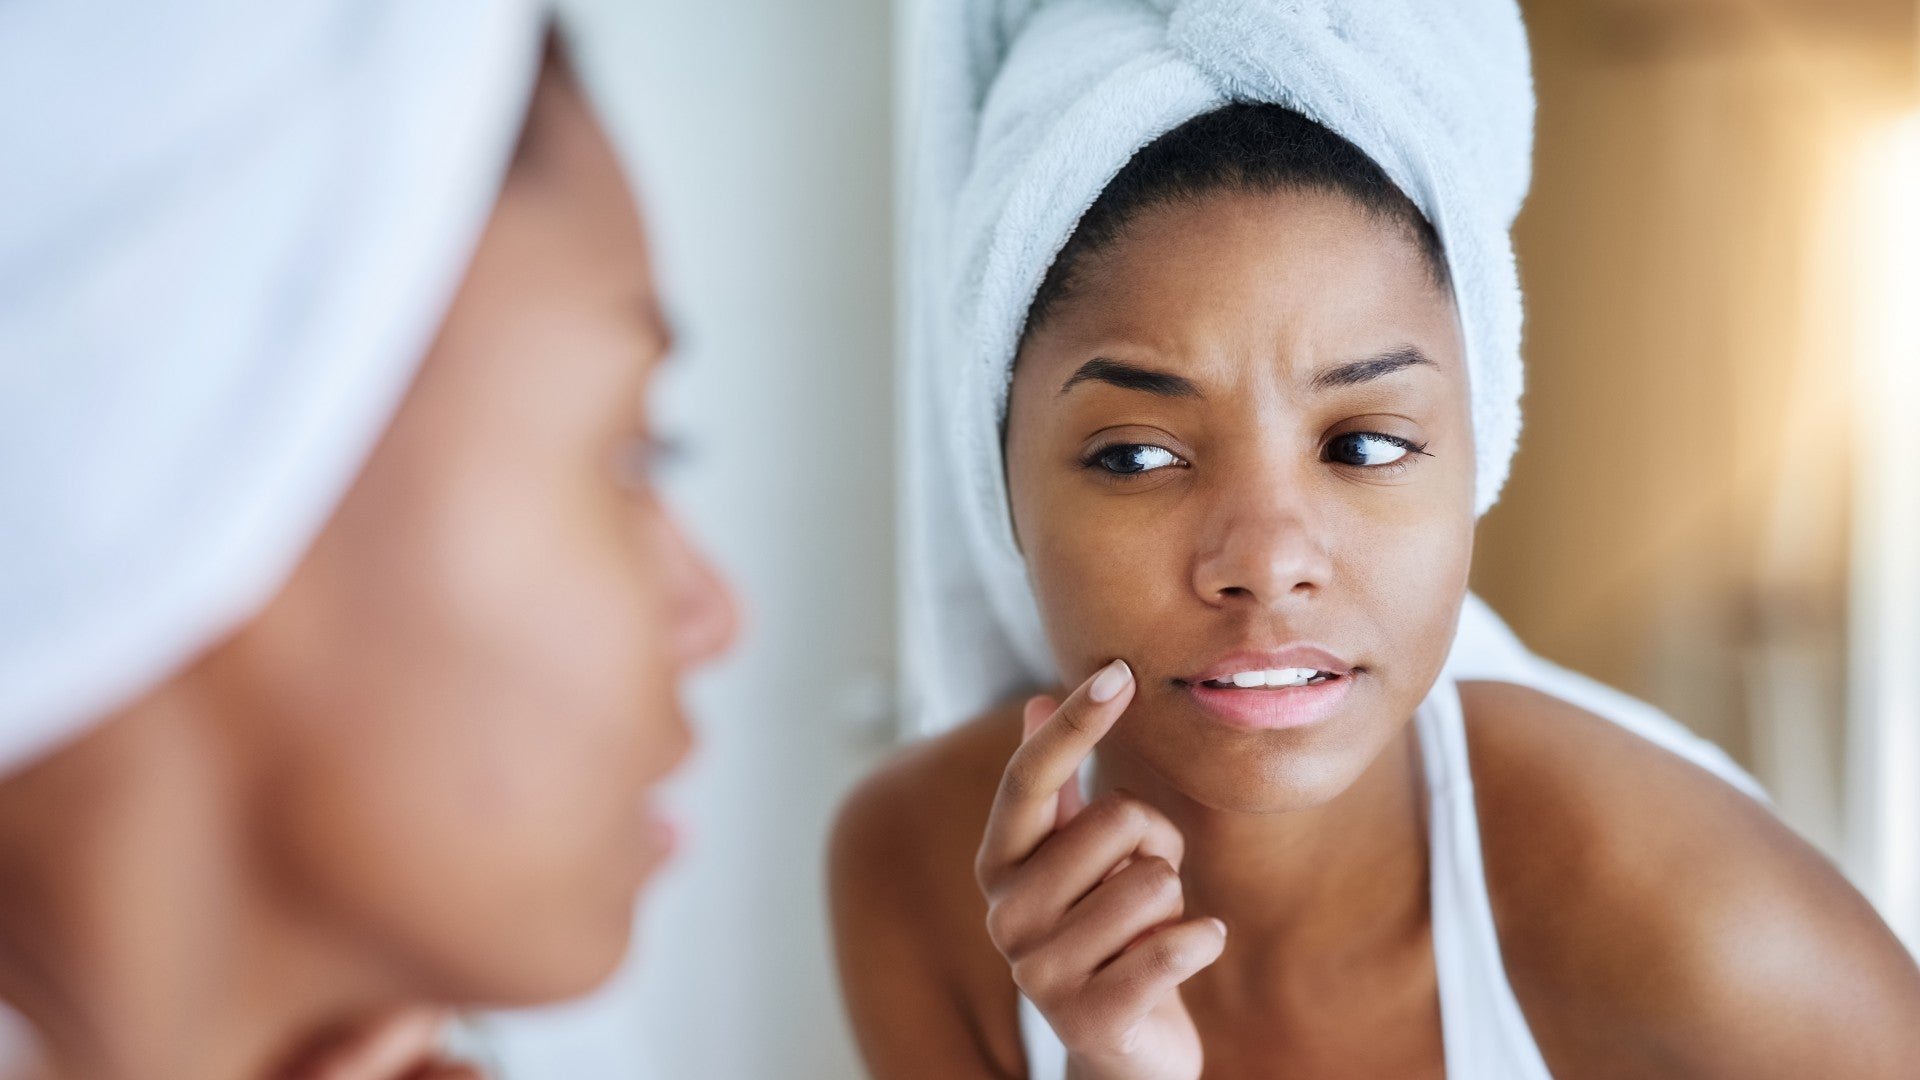 5 Quick And Easy Ways To Get Rid Of Blemishes